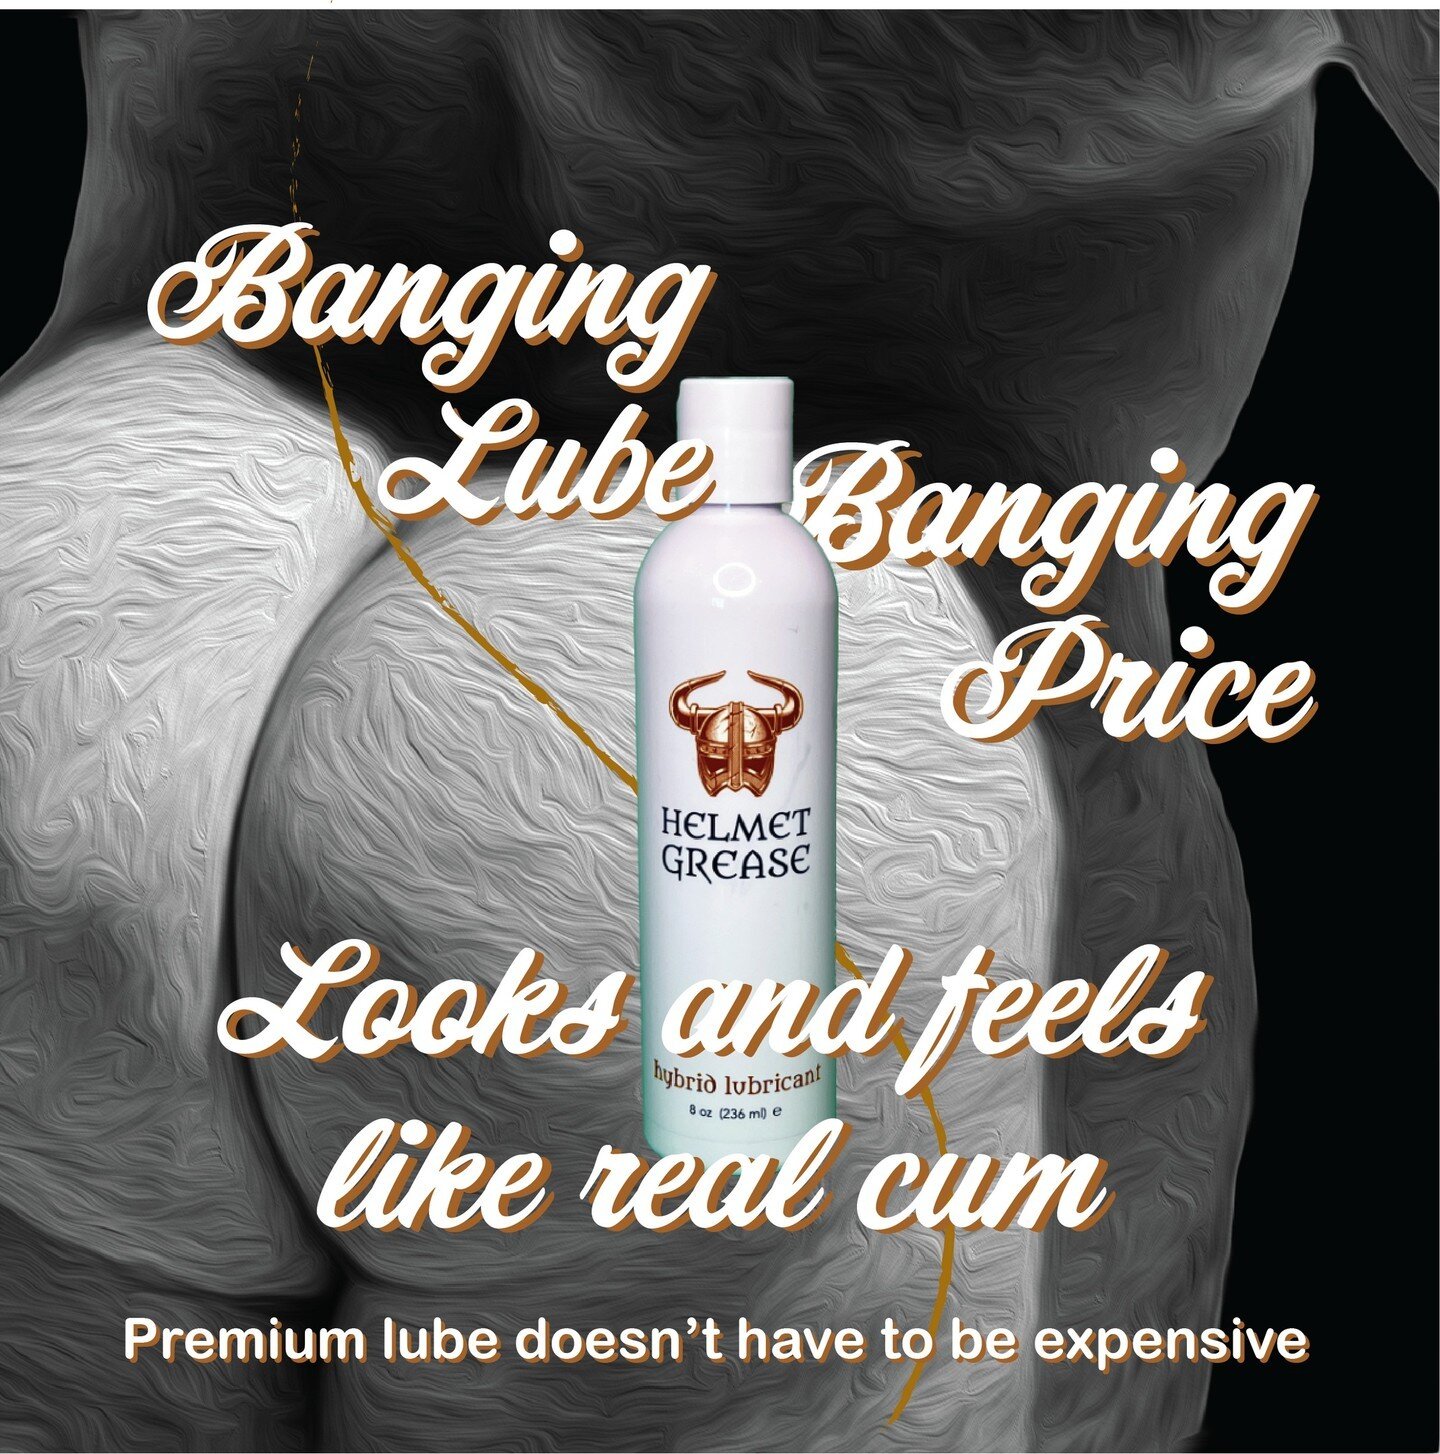 Lube that looks and feels like real cum! Banging Lube at a Banging Price!⁠ www.helmetgrease.com⁠
⁠
#helmetgrease #sexlube #banginglube #lubelife #getwet #sexualwellness #sexualhealth #wetness #bettersex #bedroomessentials #pleasureenhancement #gaypri